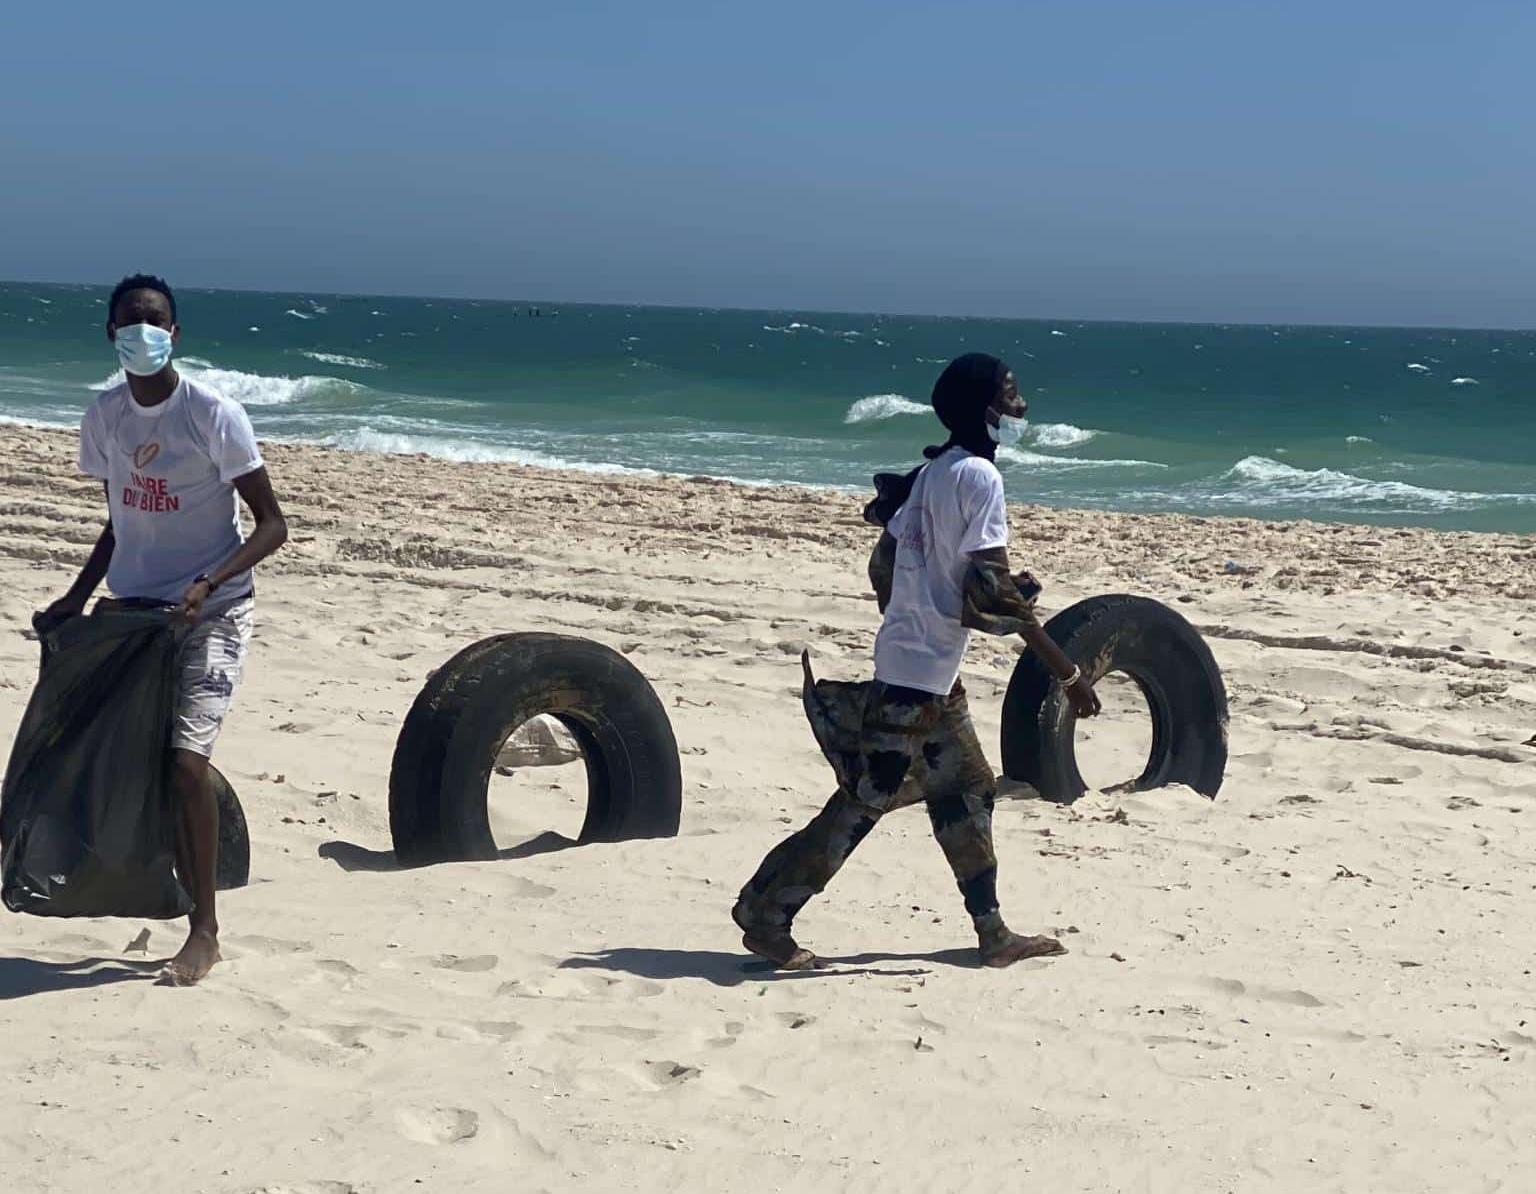 Volunteer in Mauritania makes the most of their day by cleaning up the beach.